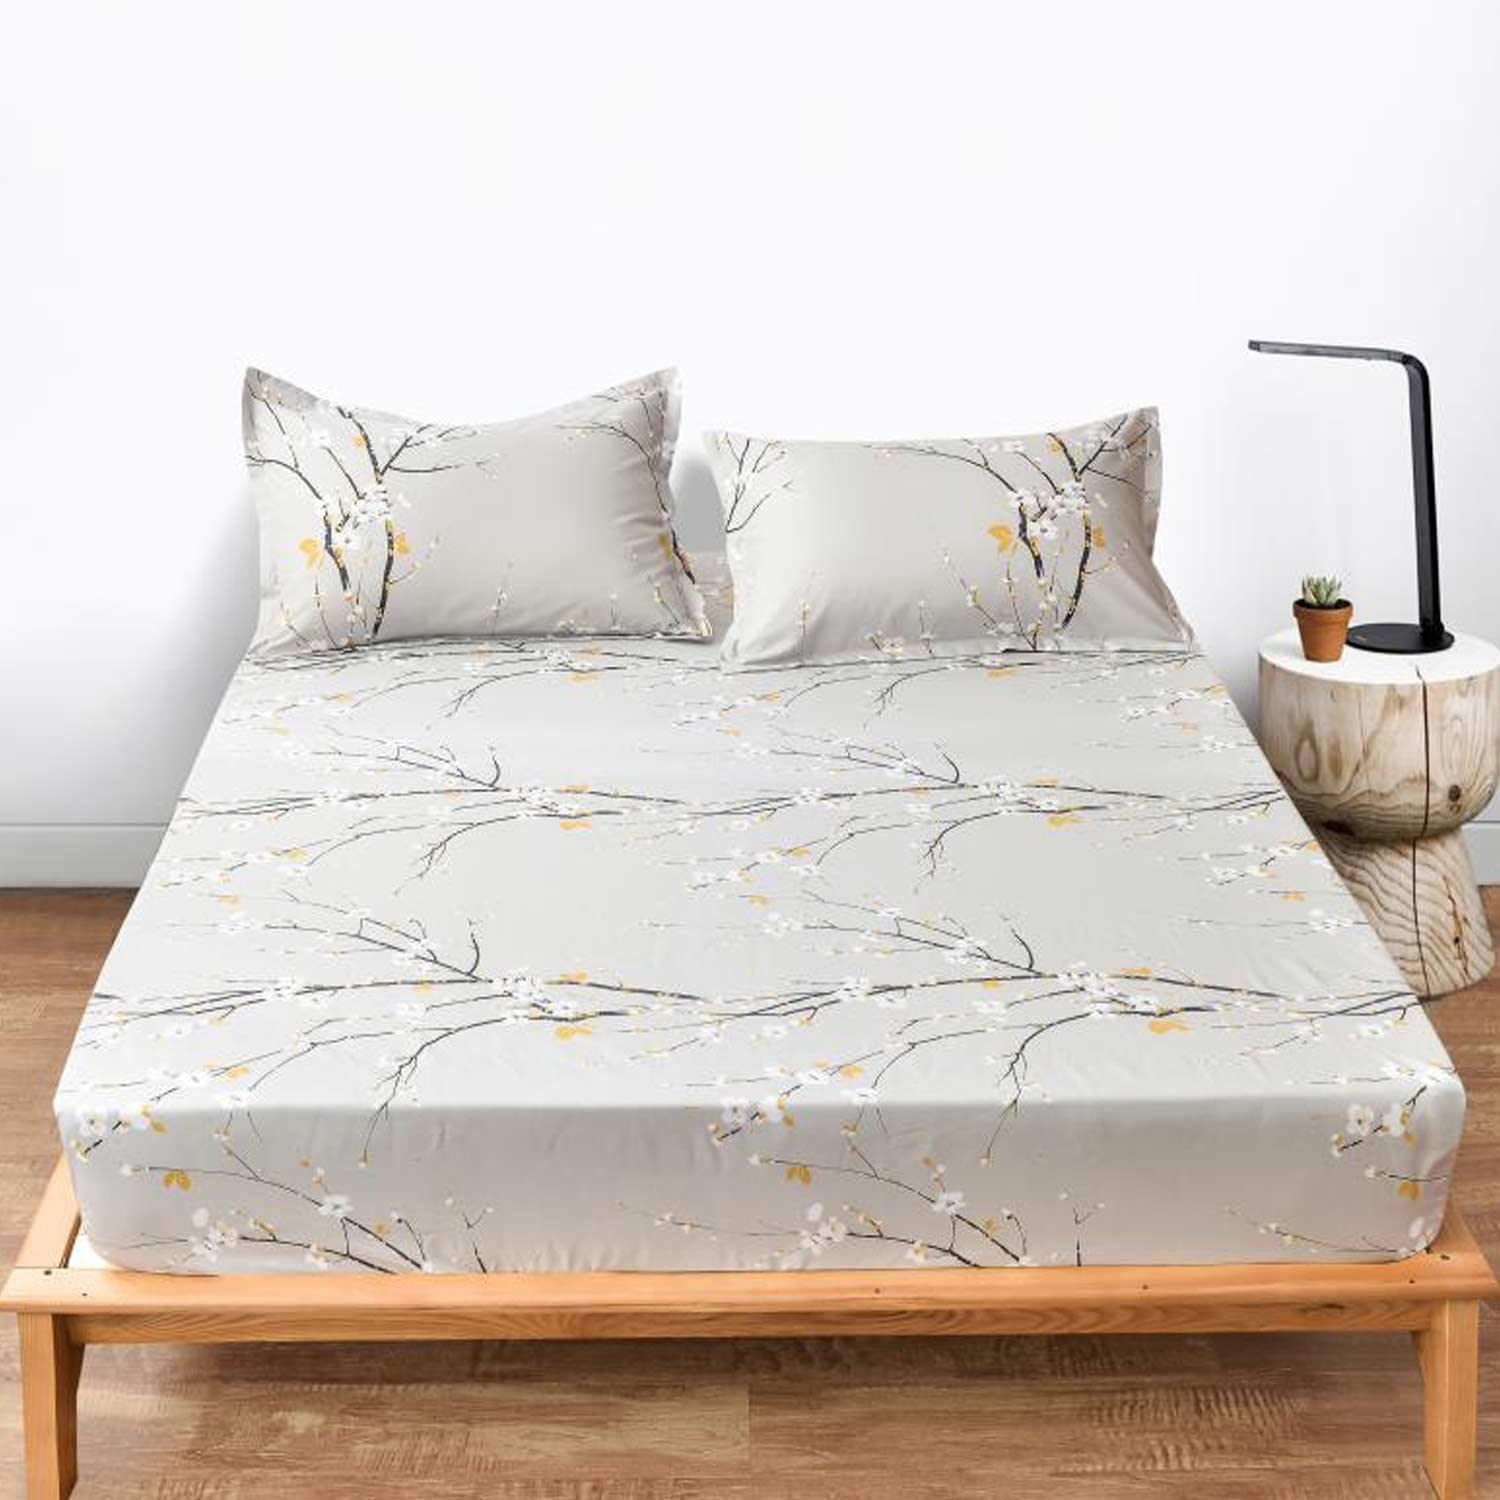 NANKO Queen Fitted Sheet 80x60 Deep Pocket Mattress Only Marble Printed  Best Lux